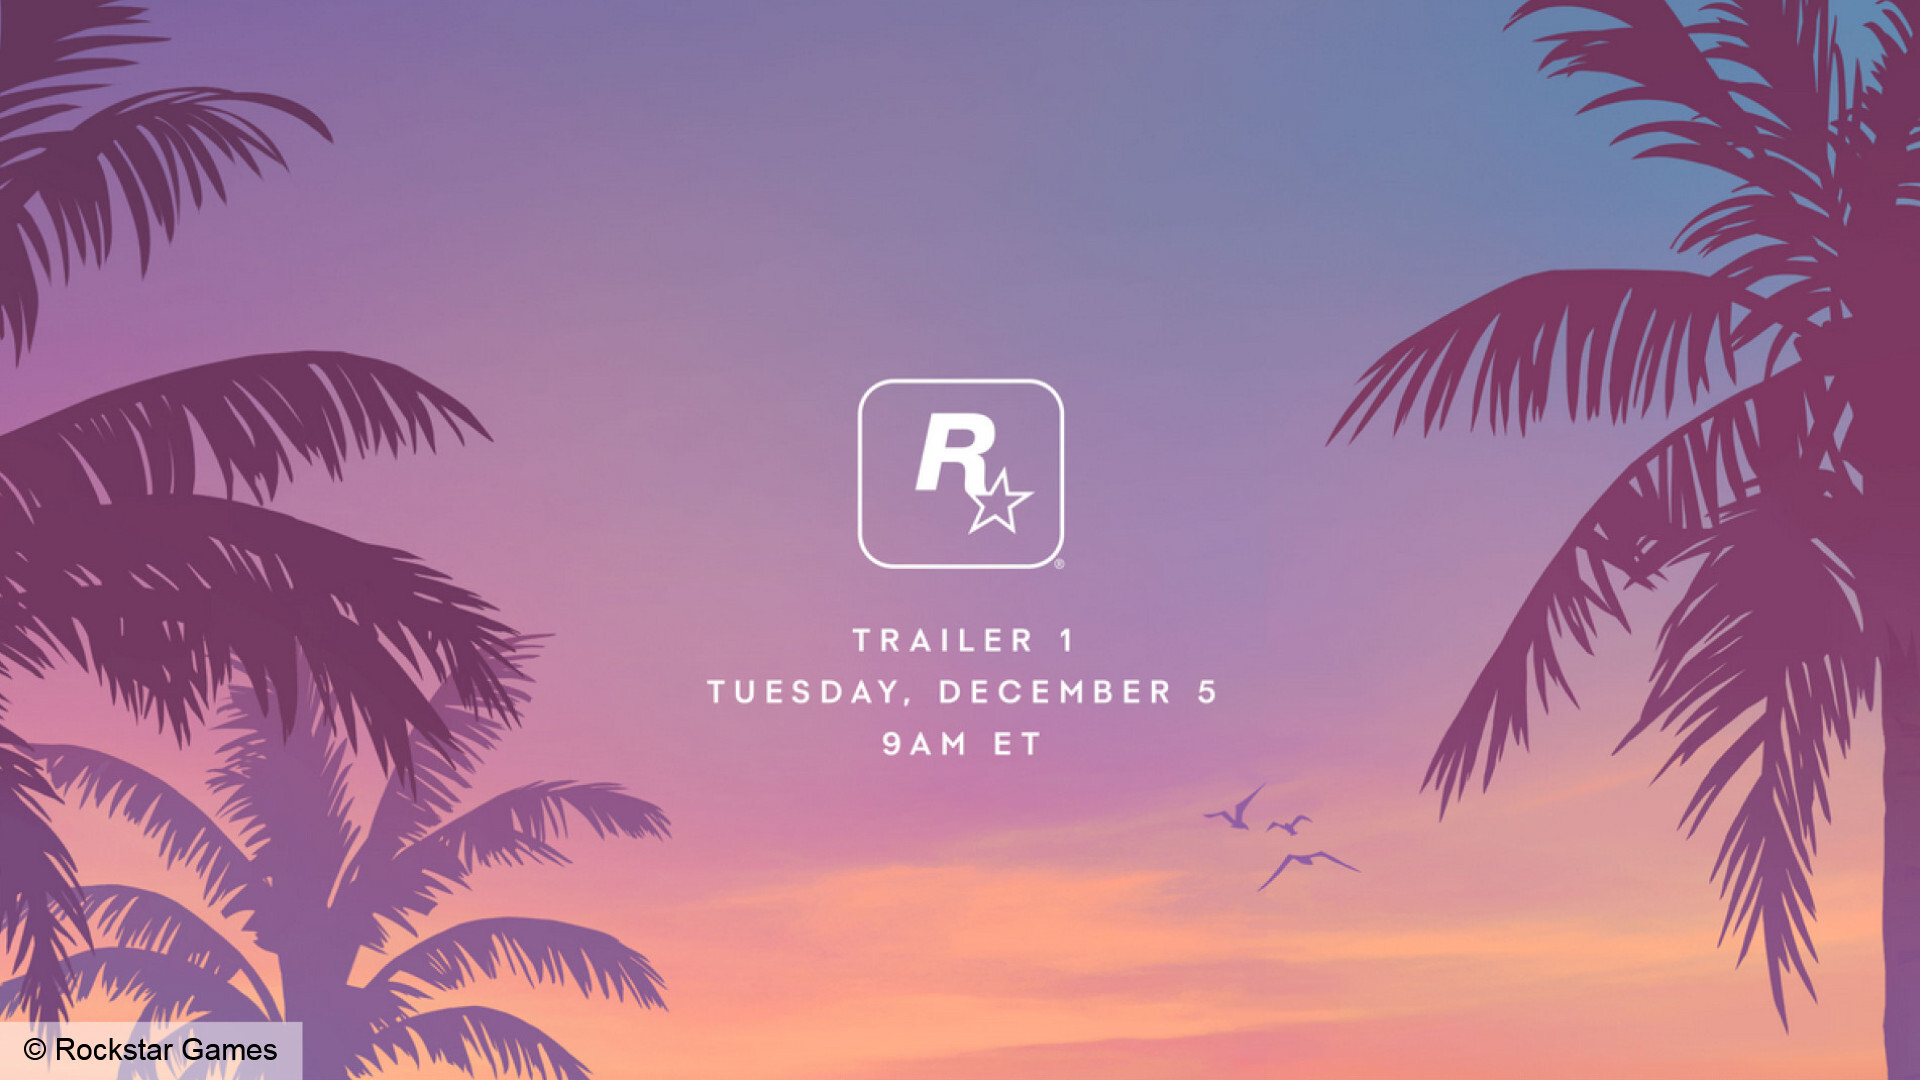 GTA 6 trailer date confirmed: A post from Rockstar about the Grand Theft Auto 6 trailer